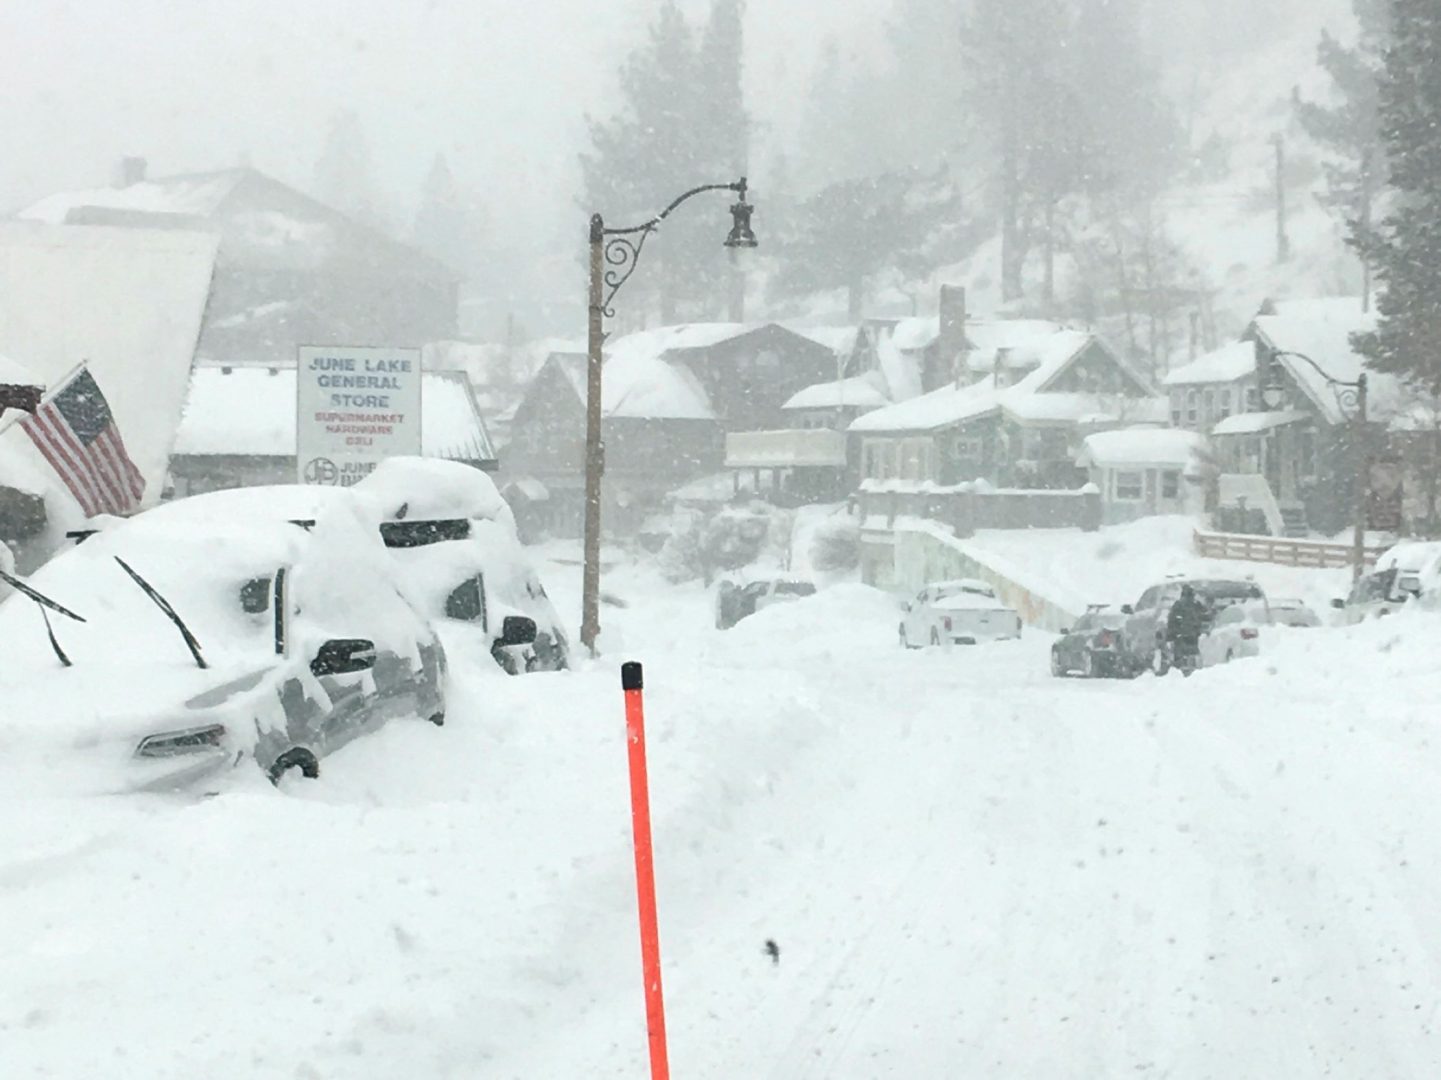 In this photo provided by Caltrans District 9, heavy snowfall blankets cars at June Lake, in Mono County, Calif., on Wednesday. The same storm that brought snow and heavy rain to the state is moving through the Midwest, with 5 to 9 inches of snowfall predicted in some regions by Sunday.